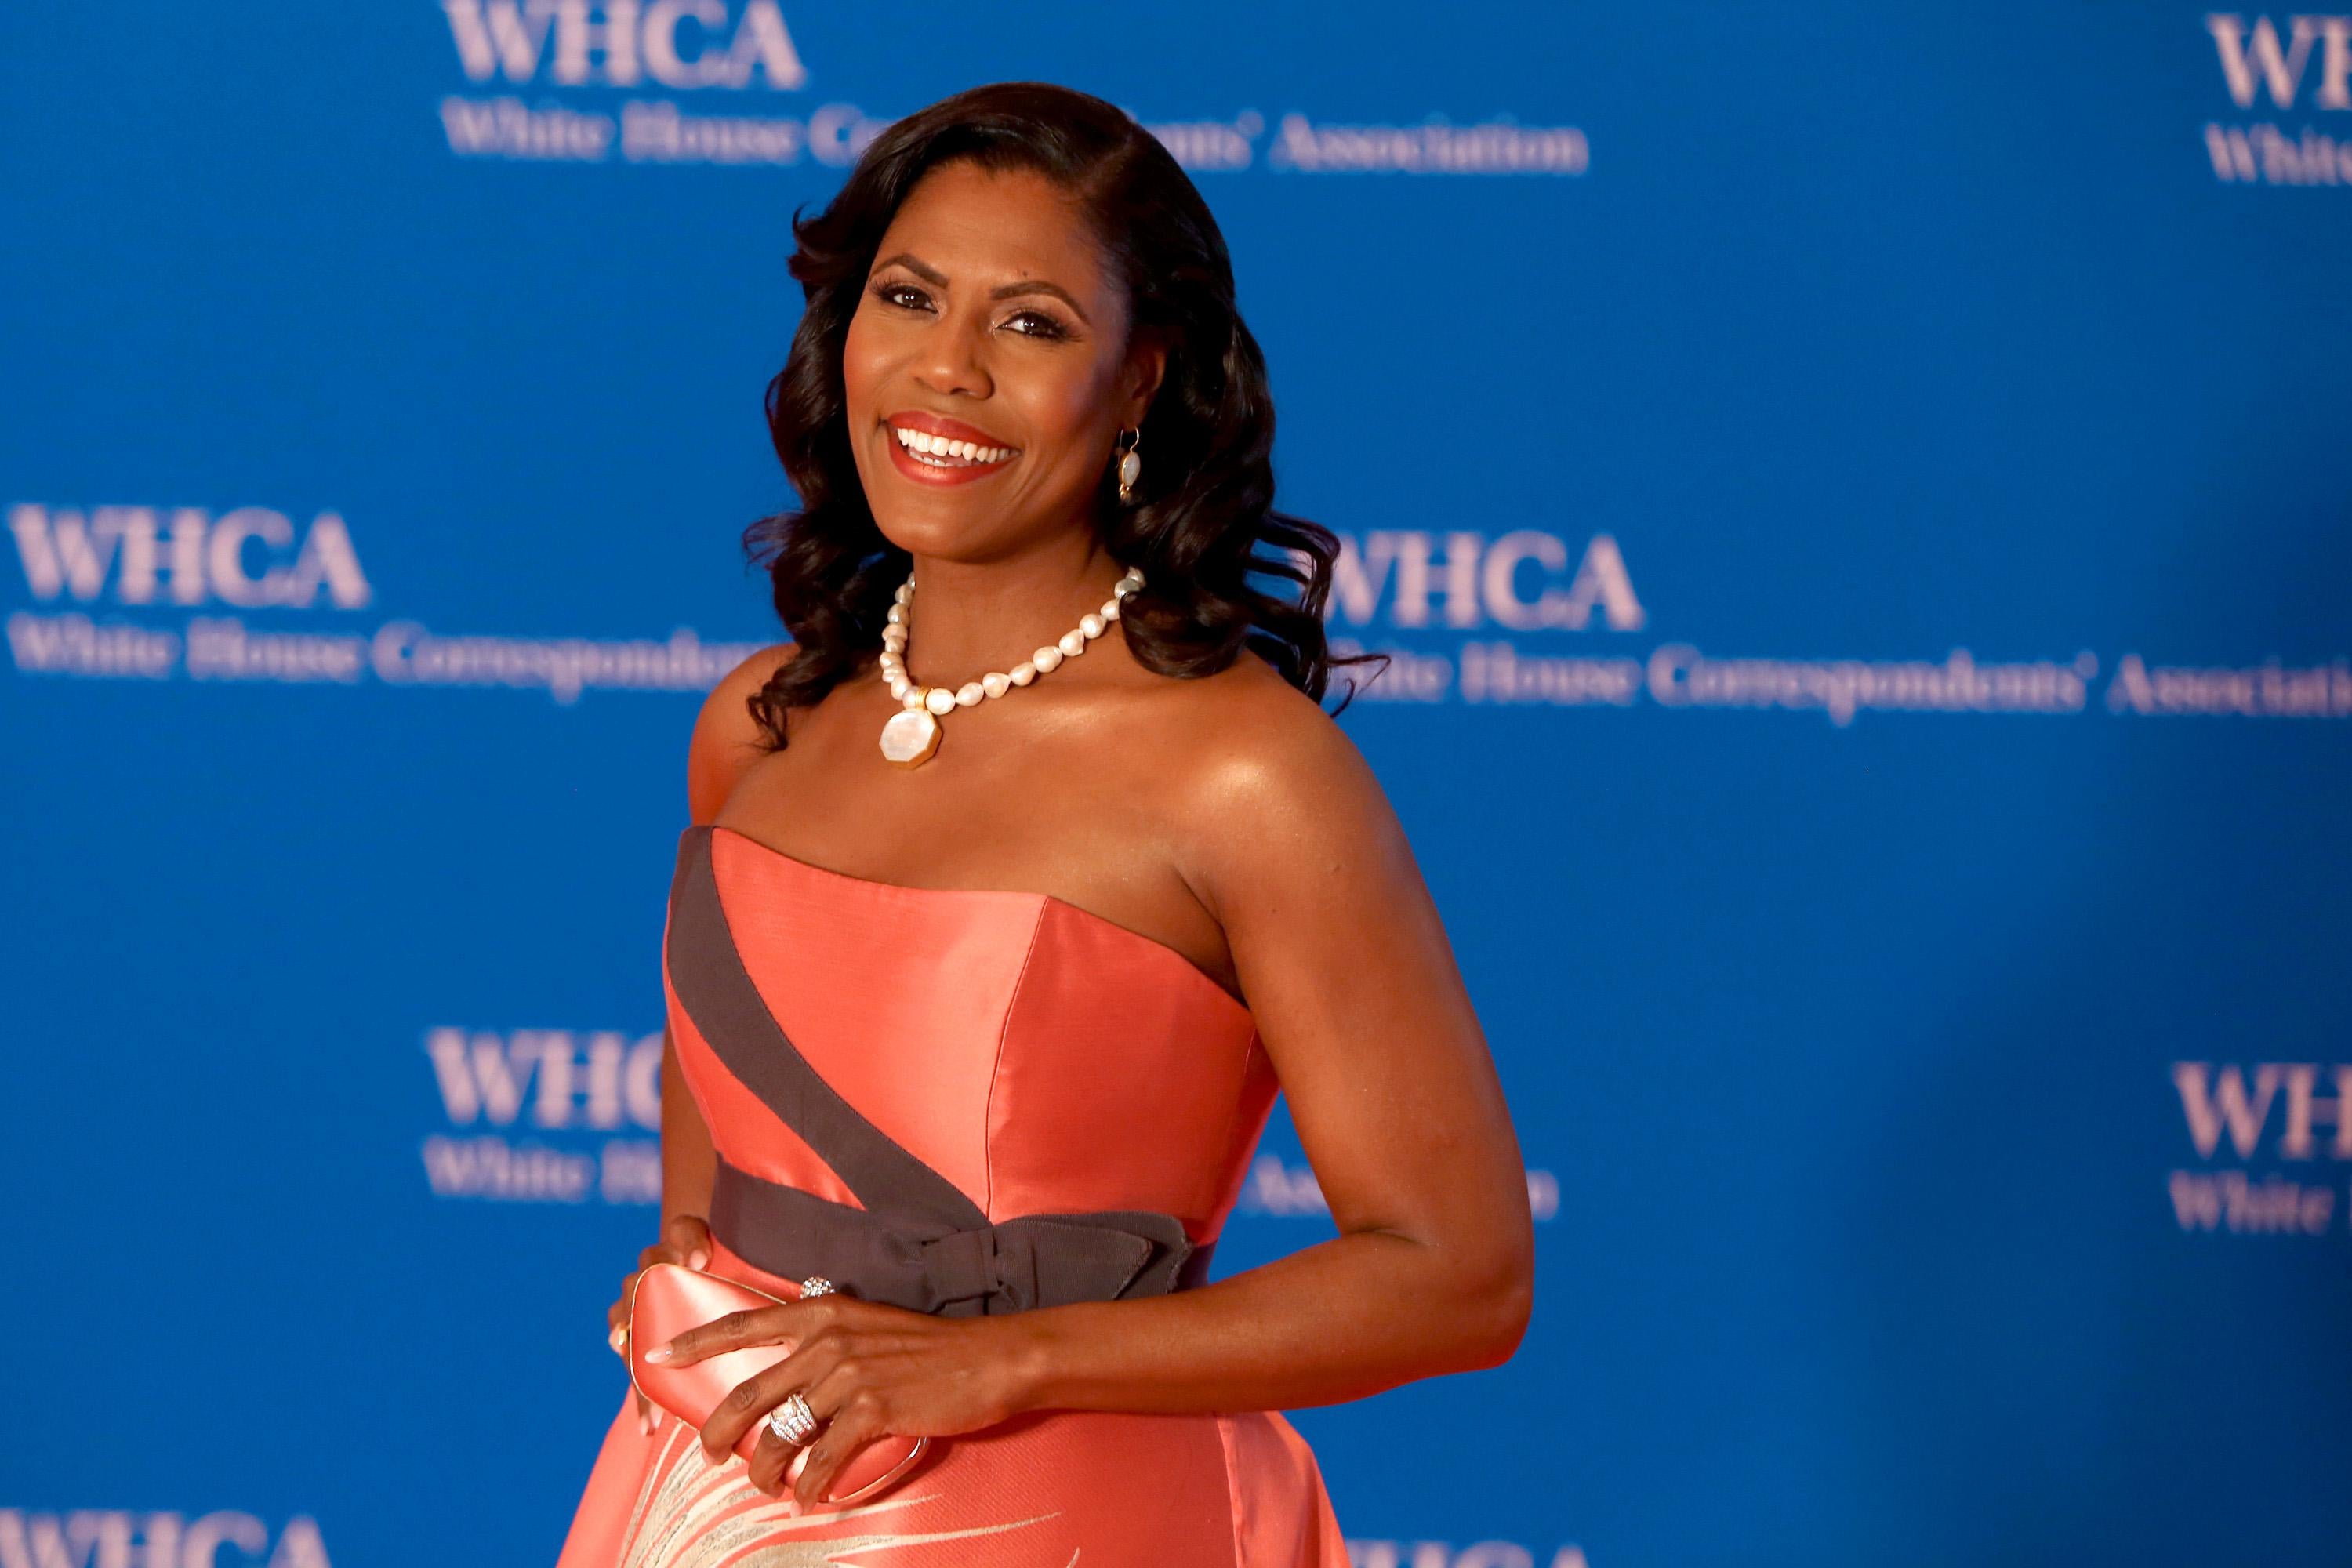 Omarosa Manigault attends the 2018 White House Correspondents’ Dinner on April 28 in Washington.